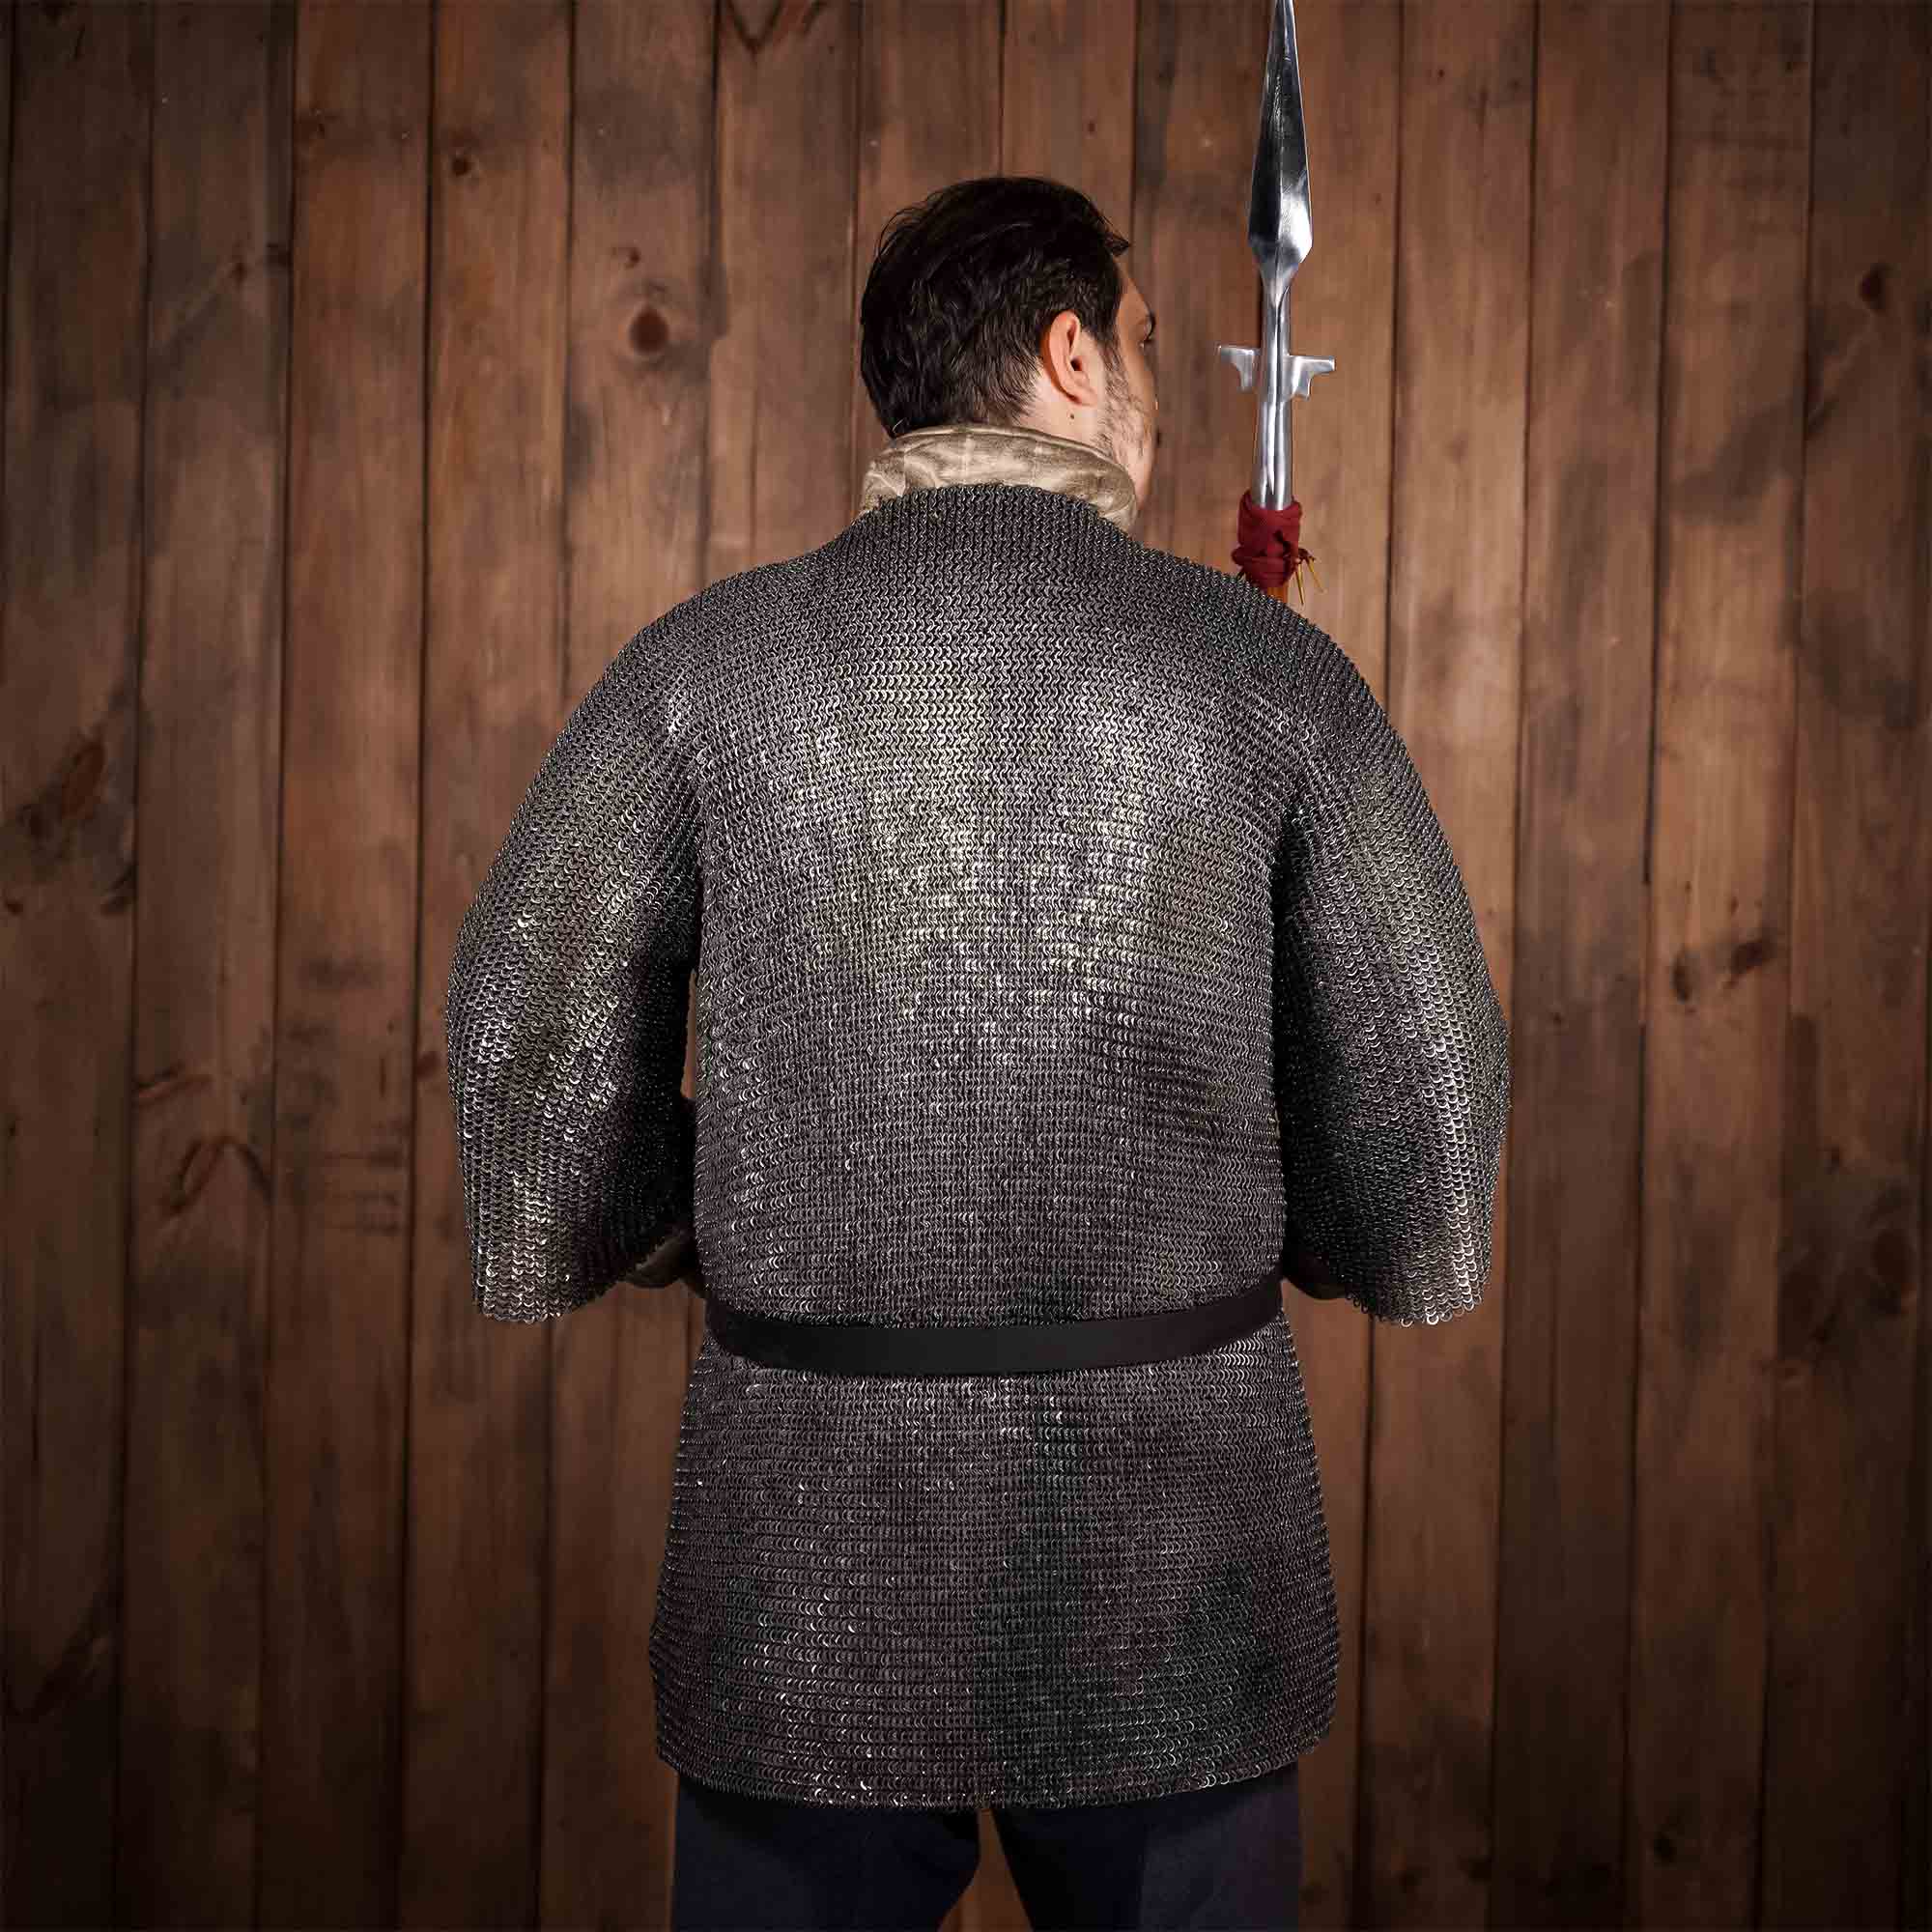 The Medieval 6MM MS Round Riveted with alternate flat ring Hauberk Chainmail  Armor Full Sleeve Shirt - Natural Oiled Finish, Large 